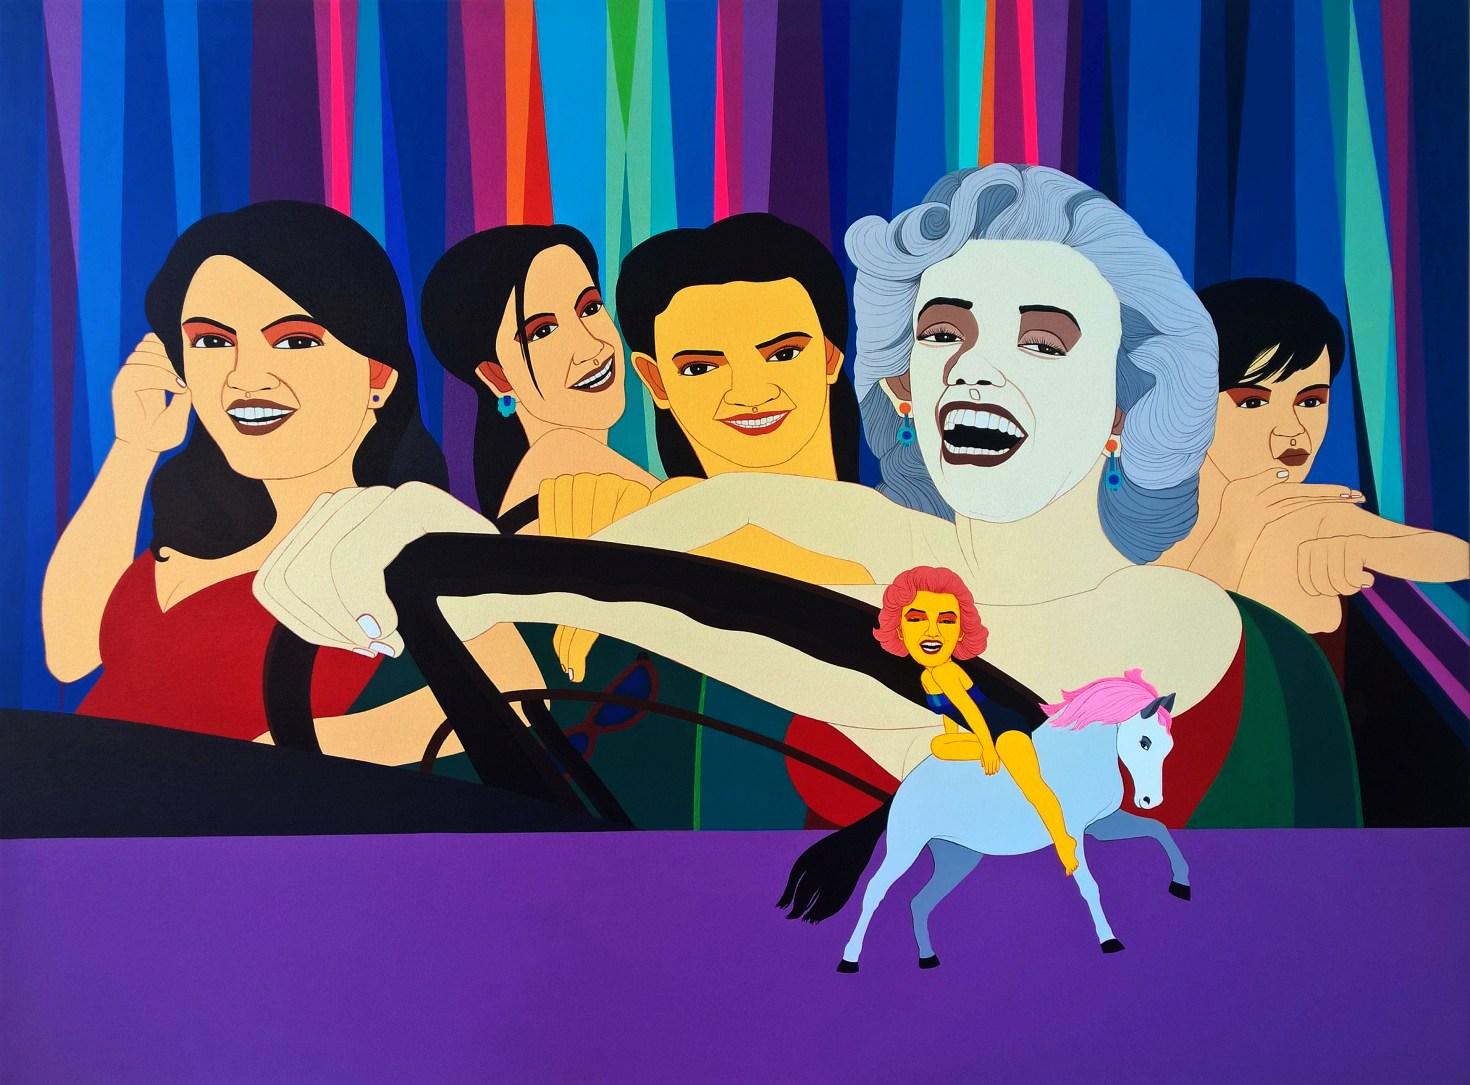 Marilyn Monroe with Friends, Acrylic on Canvas by Indian Artist "In Stock"